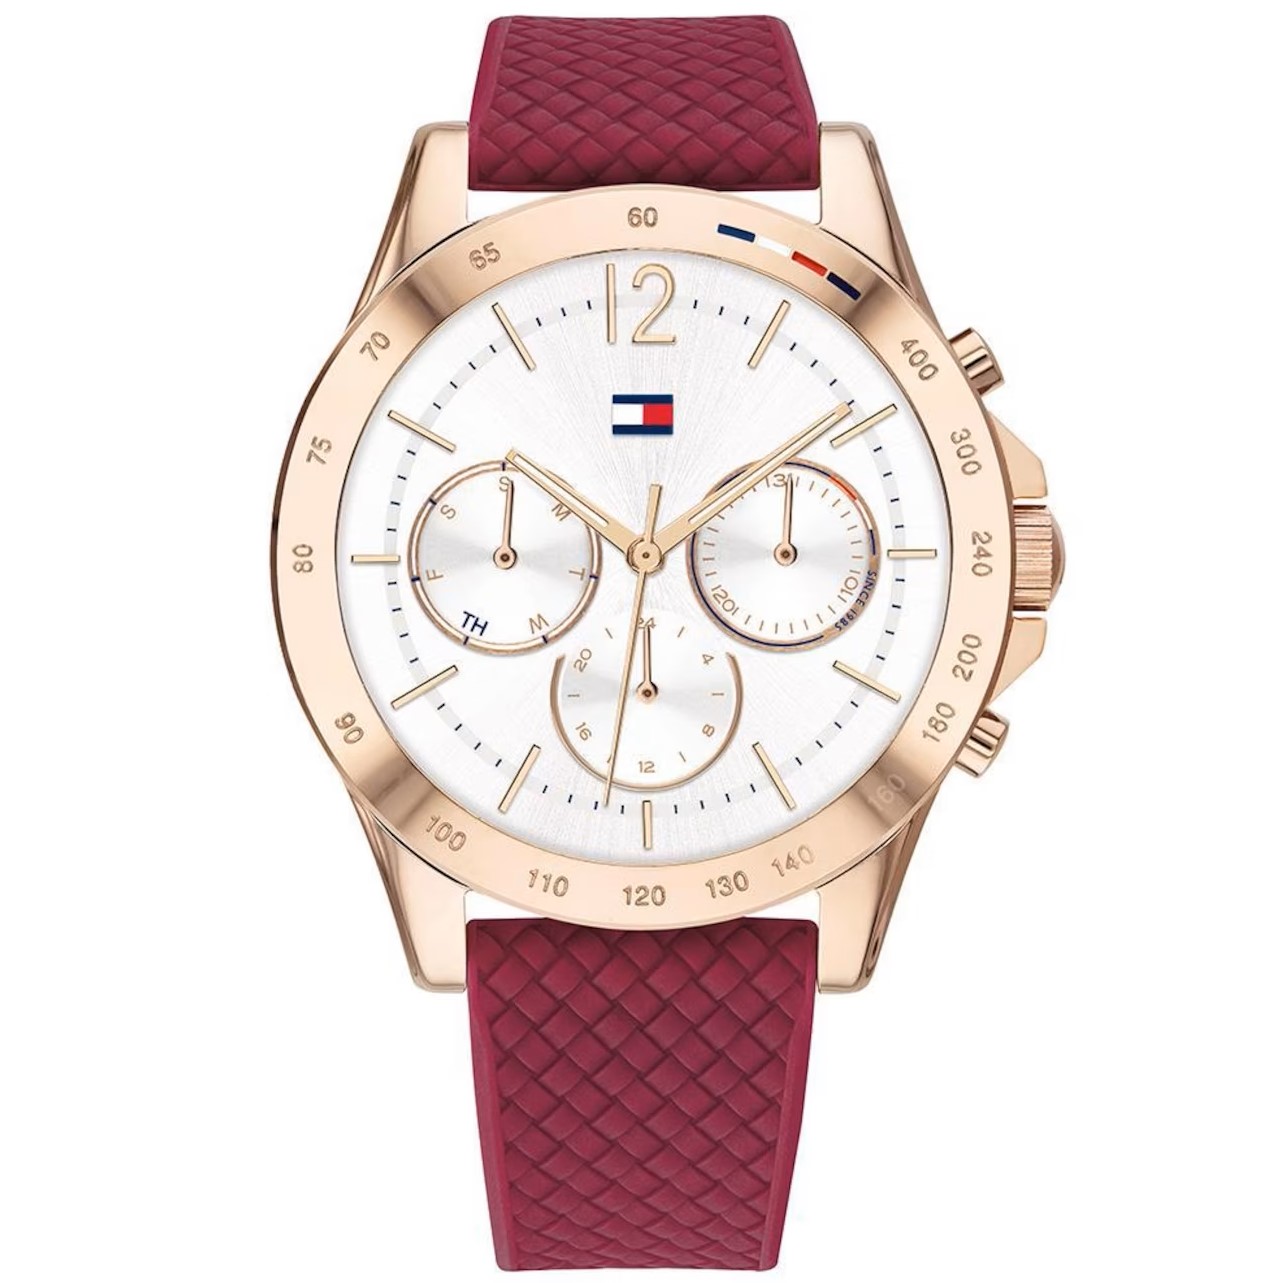 ĐỒNG HỒ NỮ TOMMY HILFIGER ROSE GOLD SPORT WATCH WITH RED SILICONE STRAP HAVEN ANALOG WATCH FOR WOMEN TH1782200W 2